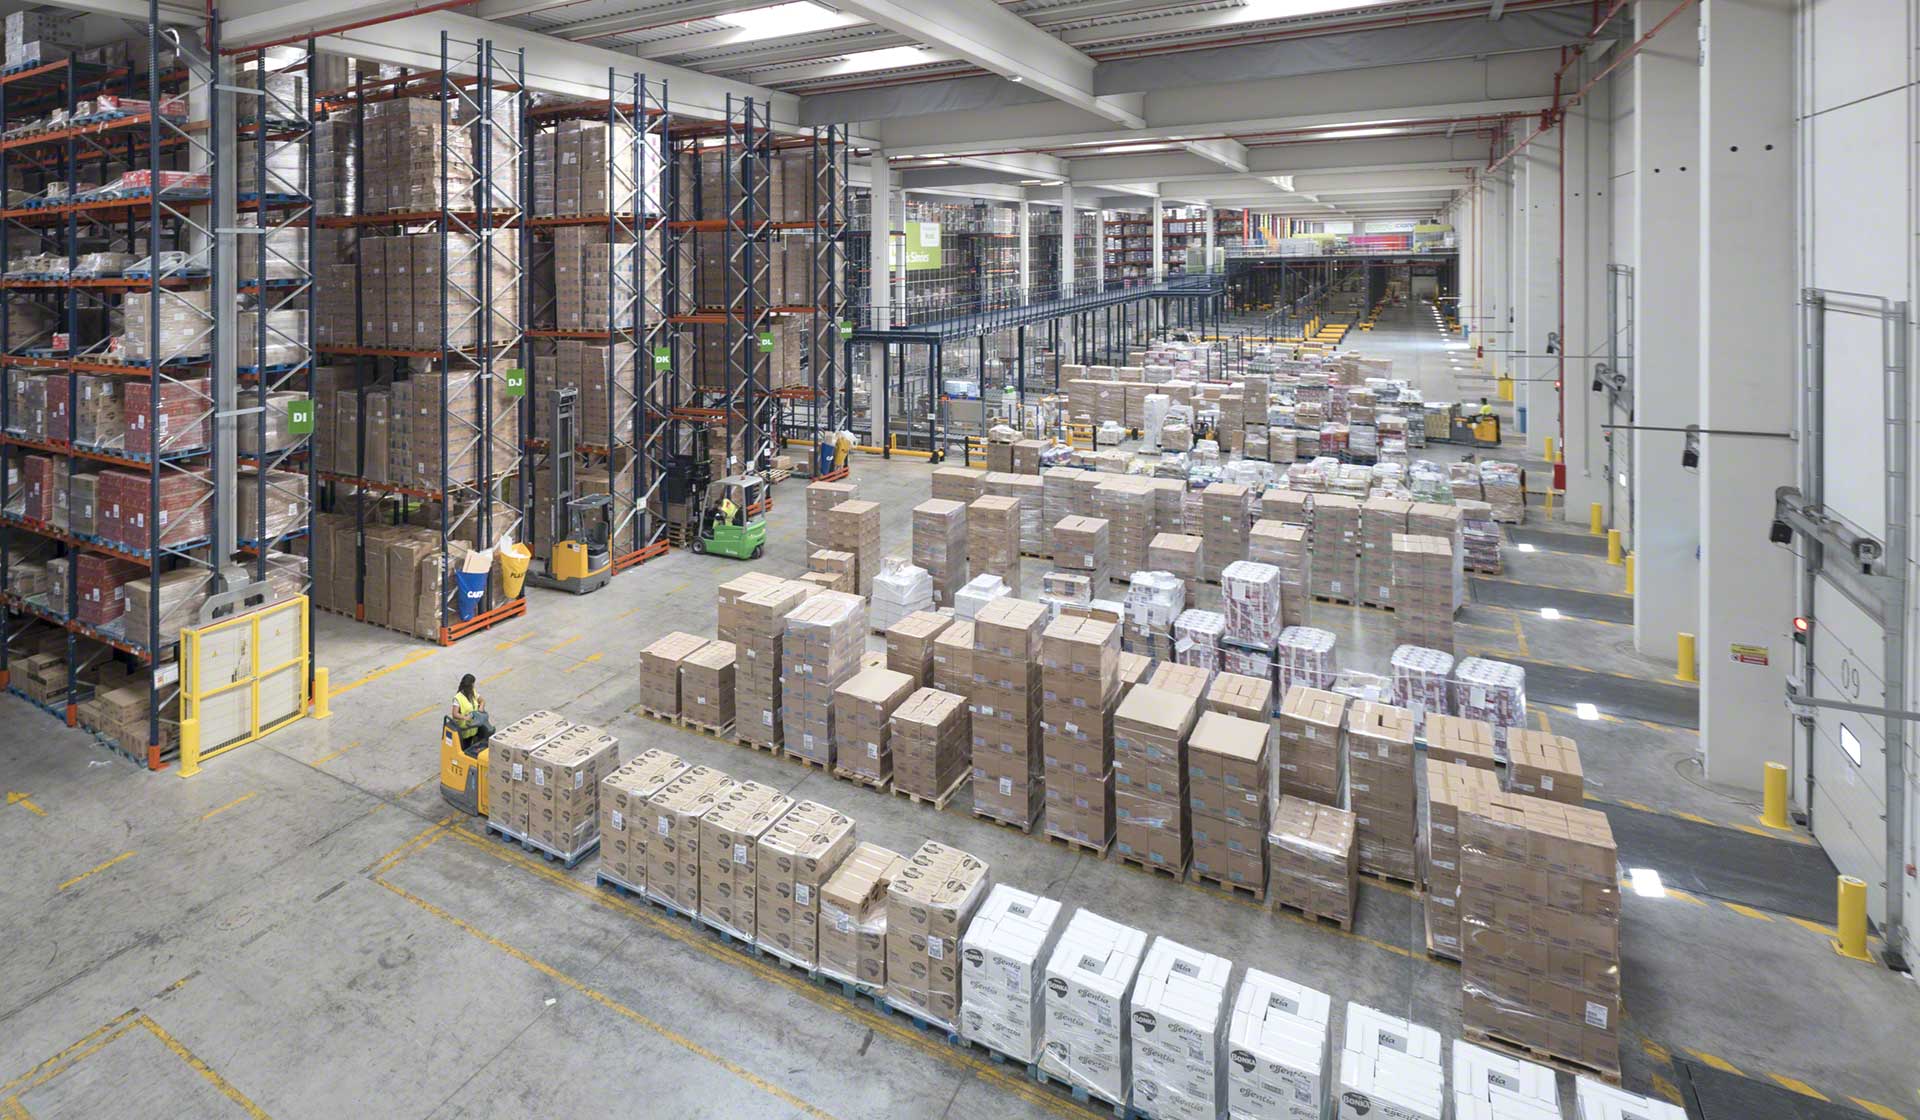 The application of continuous improvement techniques guarantees logistics cost savings and increased warehouse productivity